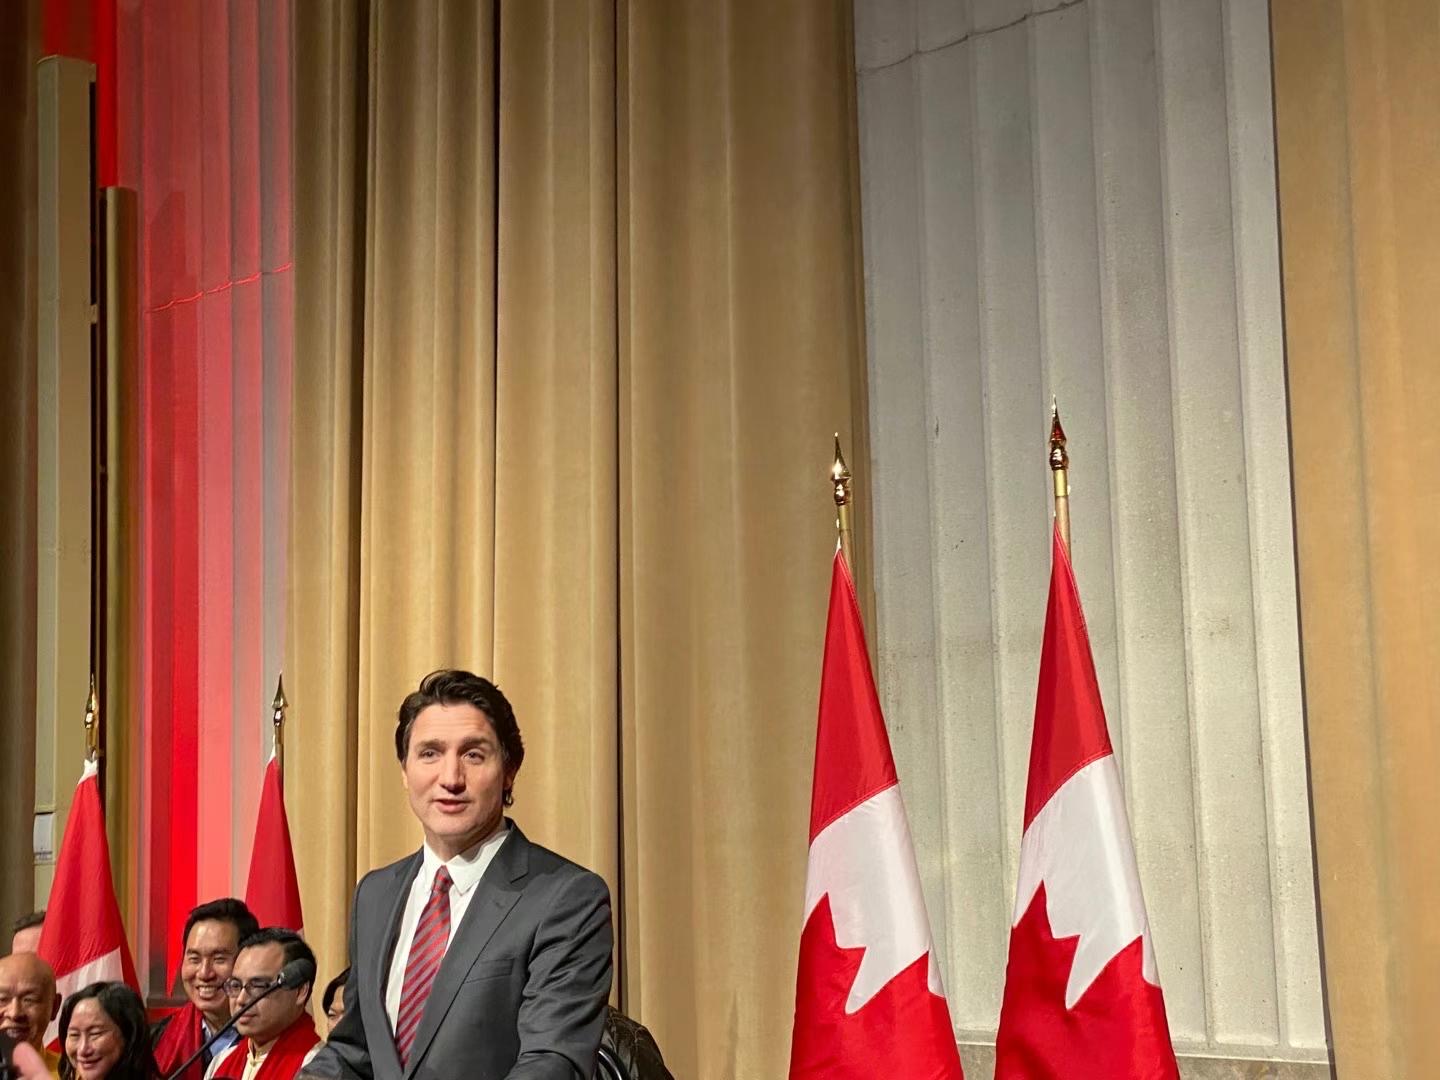 NOIC was invited to participate in three Lunar New Year celebration events organized by the Prime Minister of Canada, the Premier of Ontario and FCCM